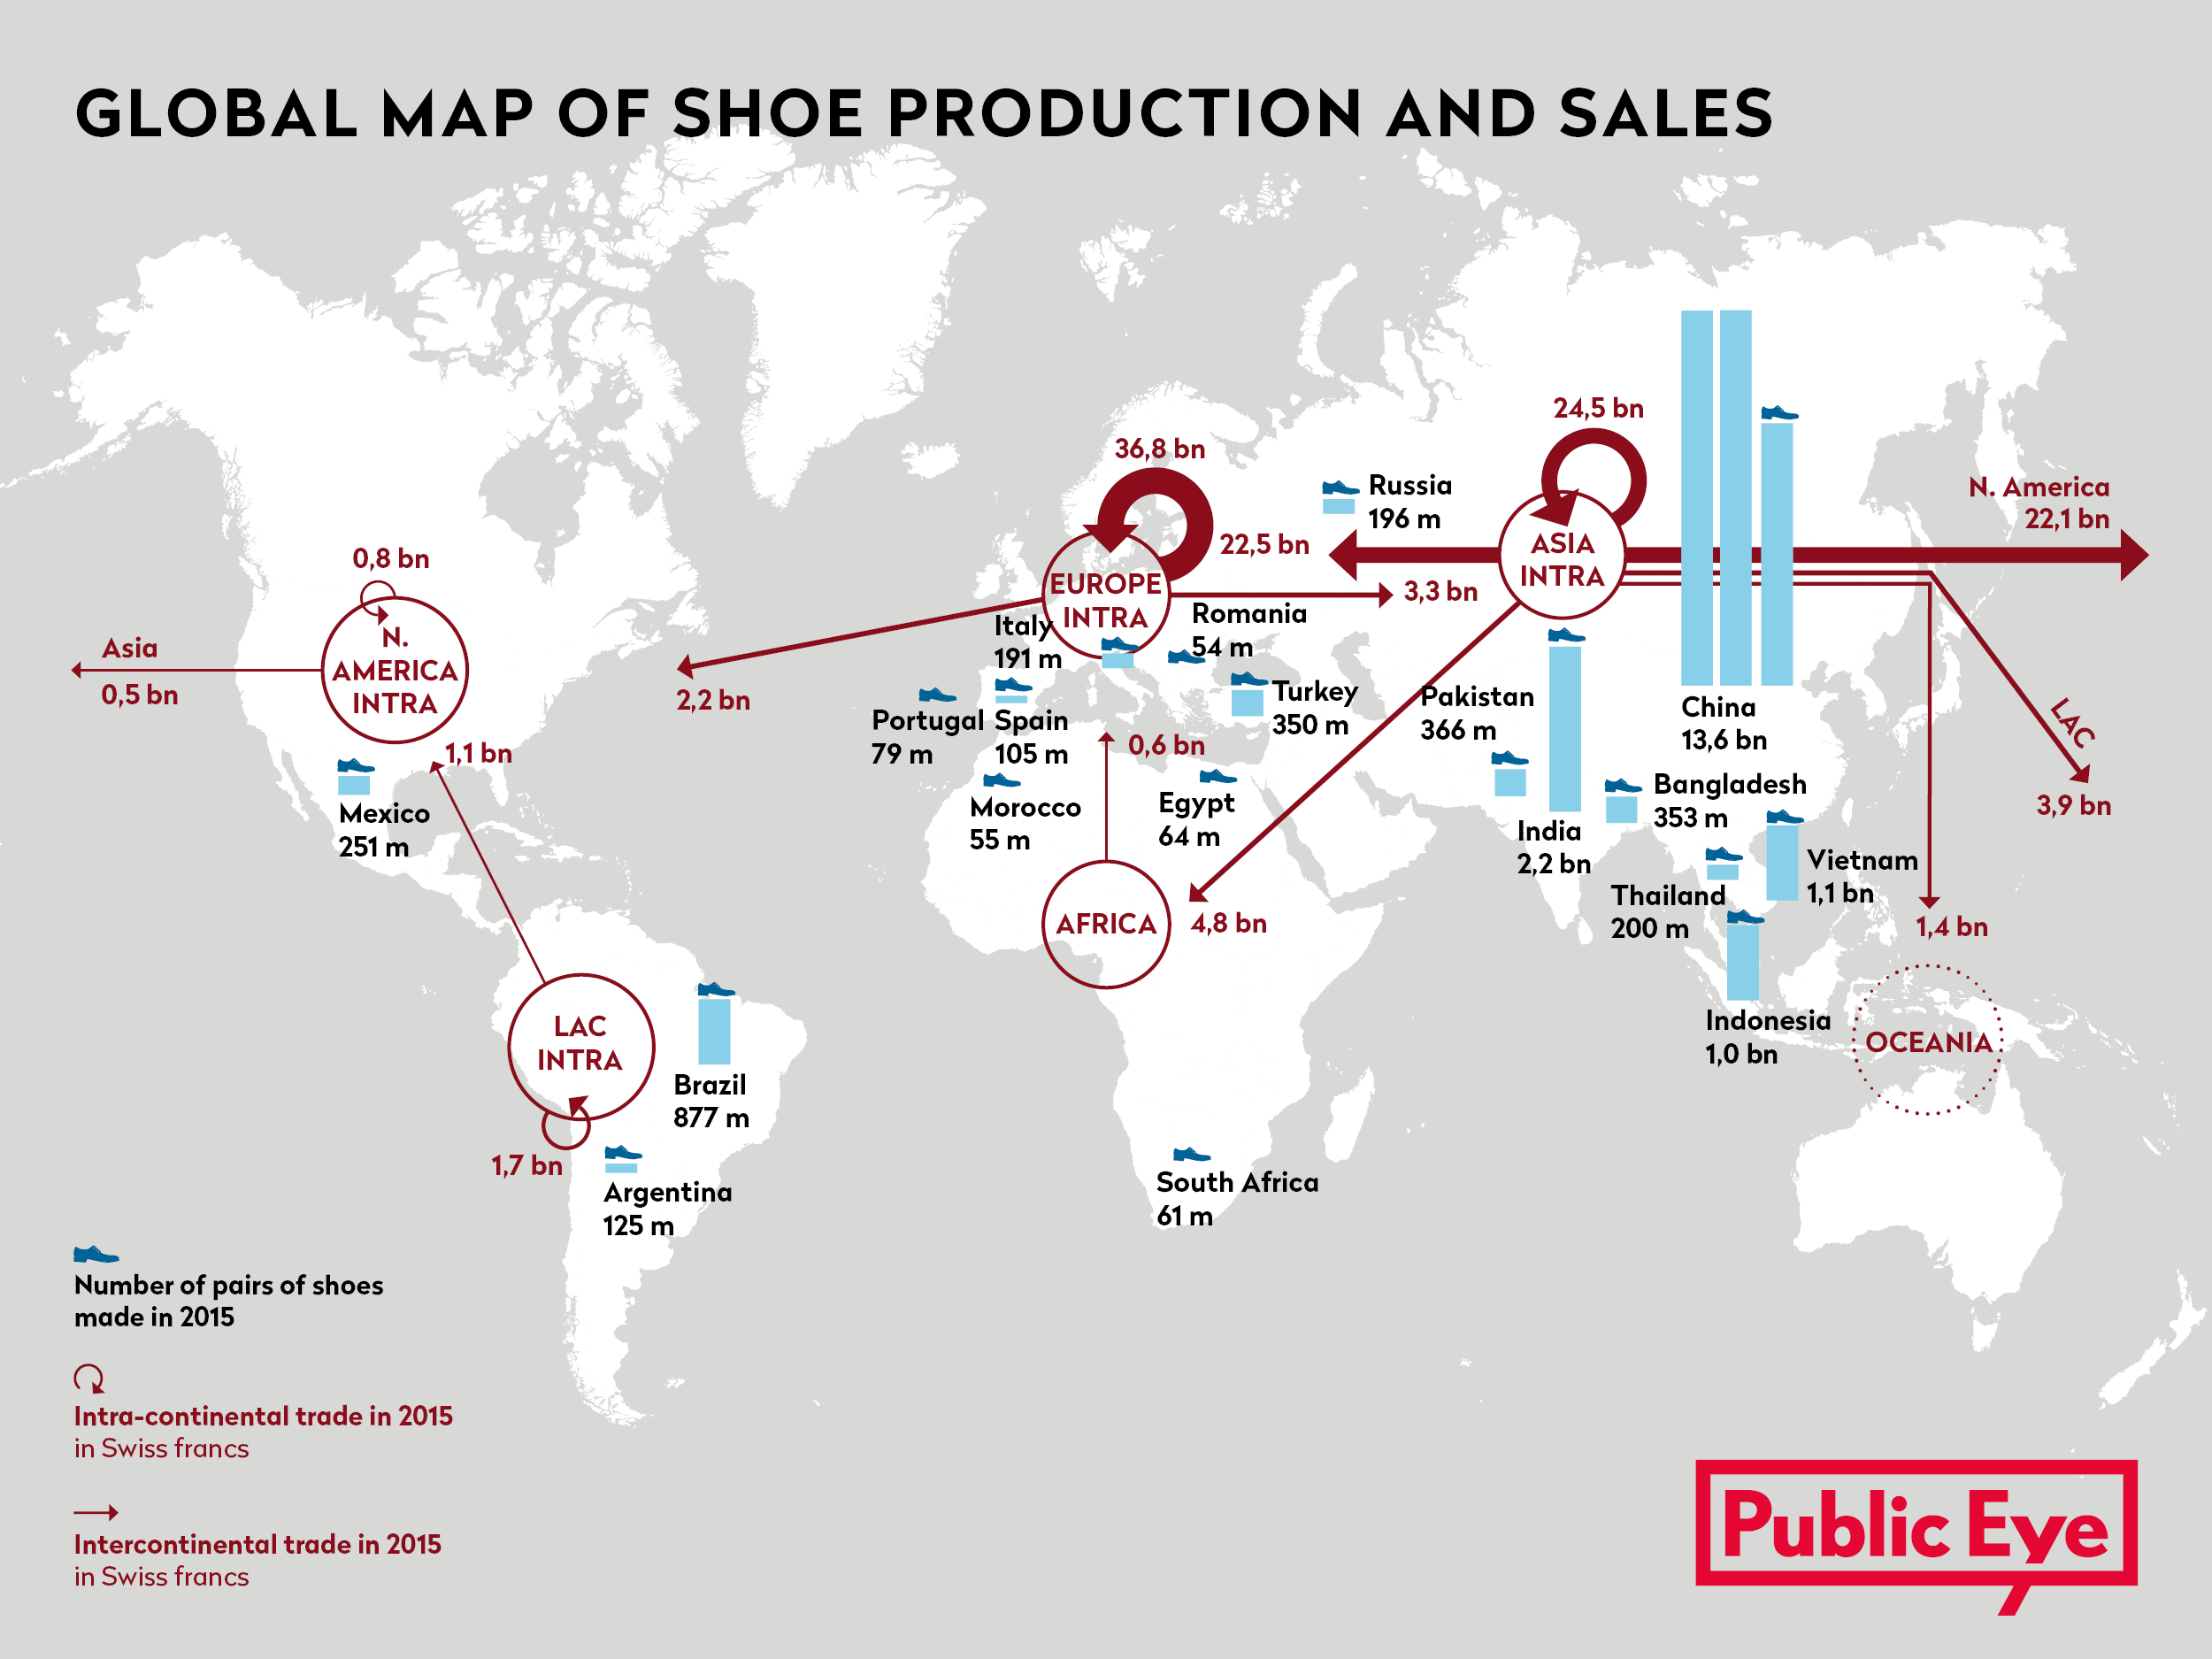 Global Map of Shoe Production and Sales @Public Eye